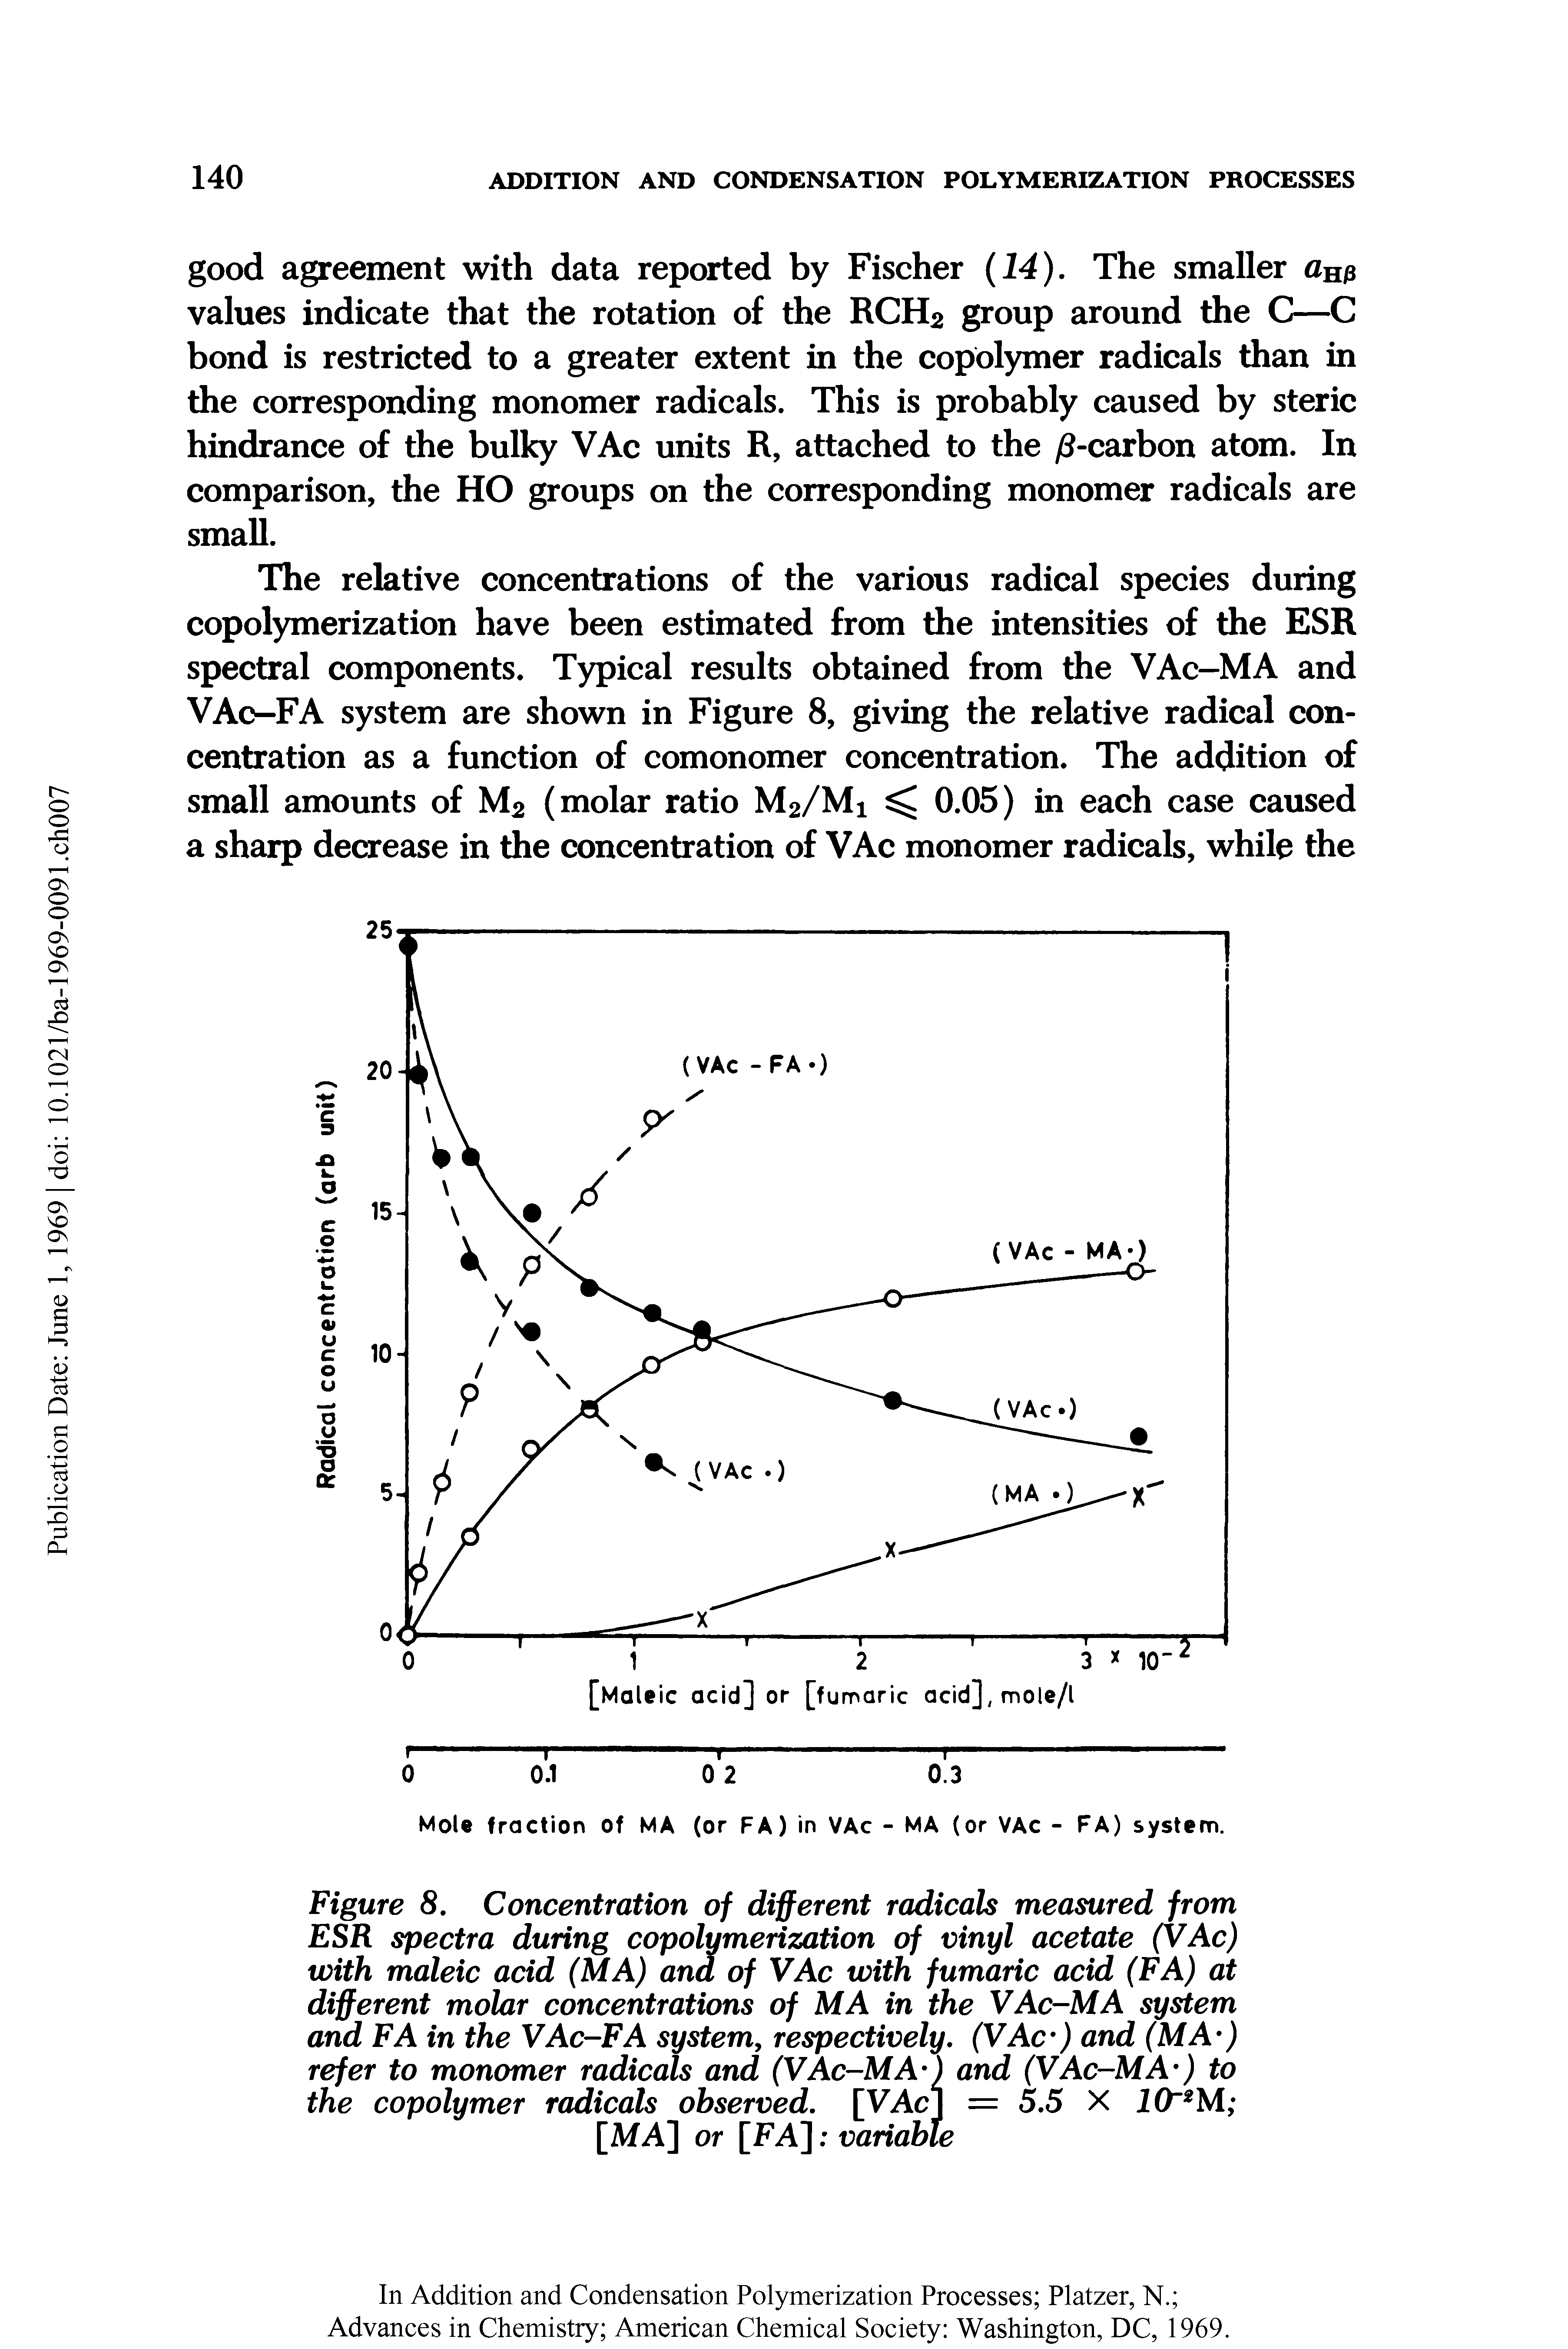 Figure 8. Concentration of different radicals measured from ESR spectra during copolymerization of vinyl acetate (VAc) with maleic acid (MA) ana of VAc with fumaric acid (FA) at different molar concentrations of MA in the VAc-MA system and FA in the VAc-FA system, respectively. (VAc-) and (MA-) refer to monomer radicals and (VAc-MA-) and (VAc-MA-) to the copolymer radicals observed. [VAc] = 5.5 X 10 2M ...